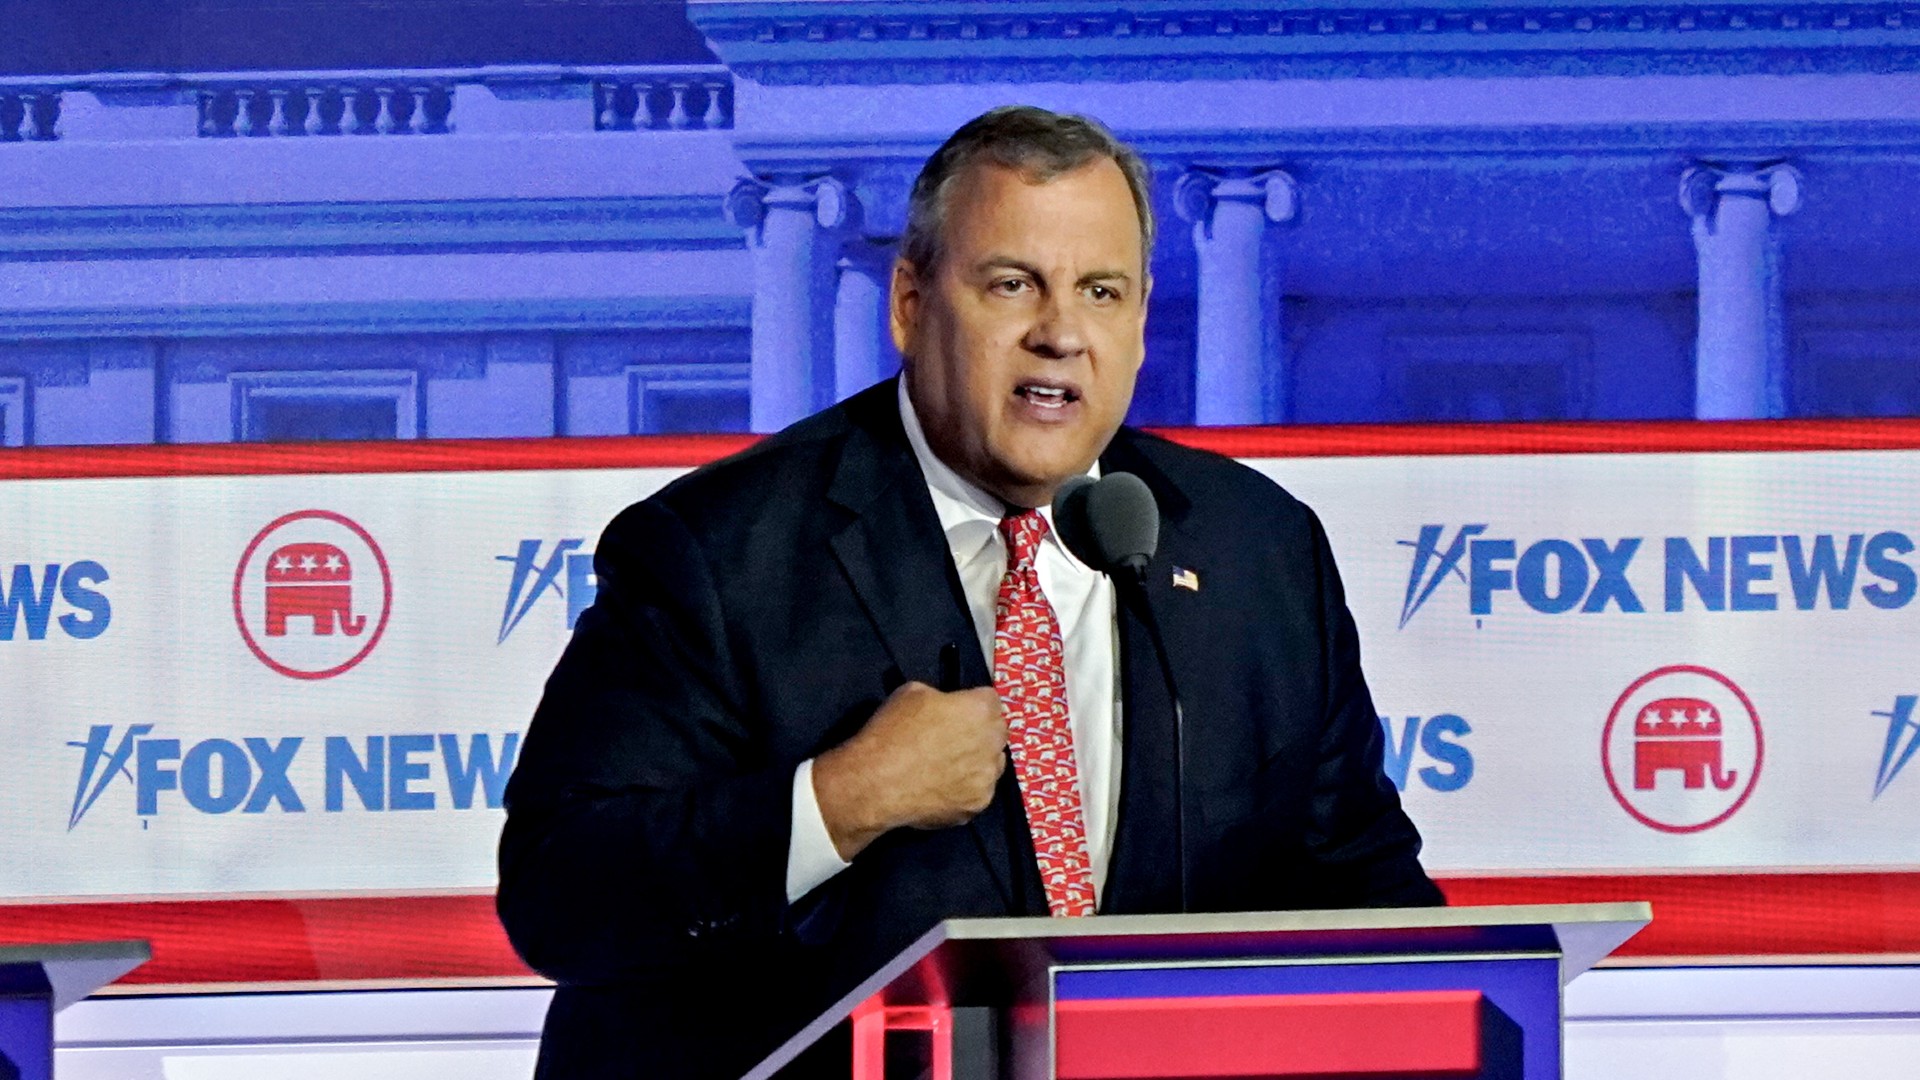 ‘I get the UFO question?’ New Jersey’s Chris Christie promises honesty on aliens in 1st Republican presidential debate